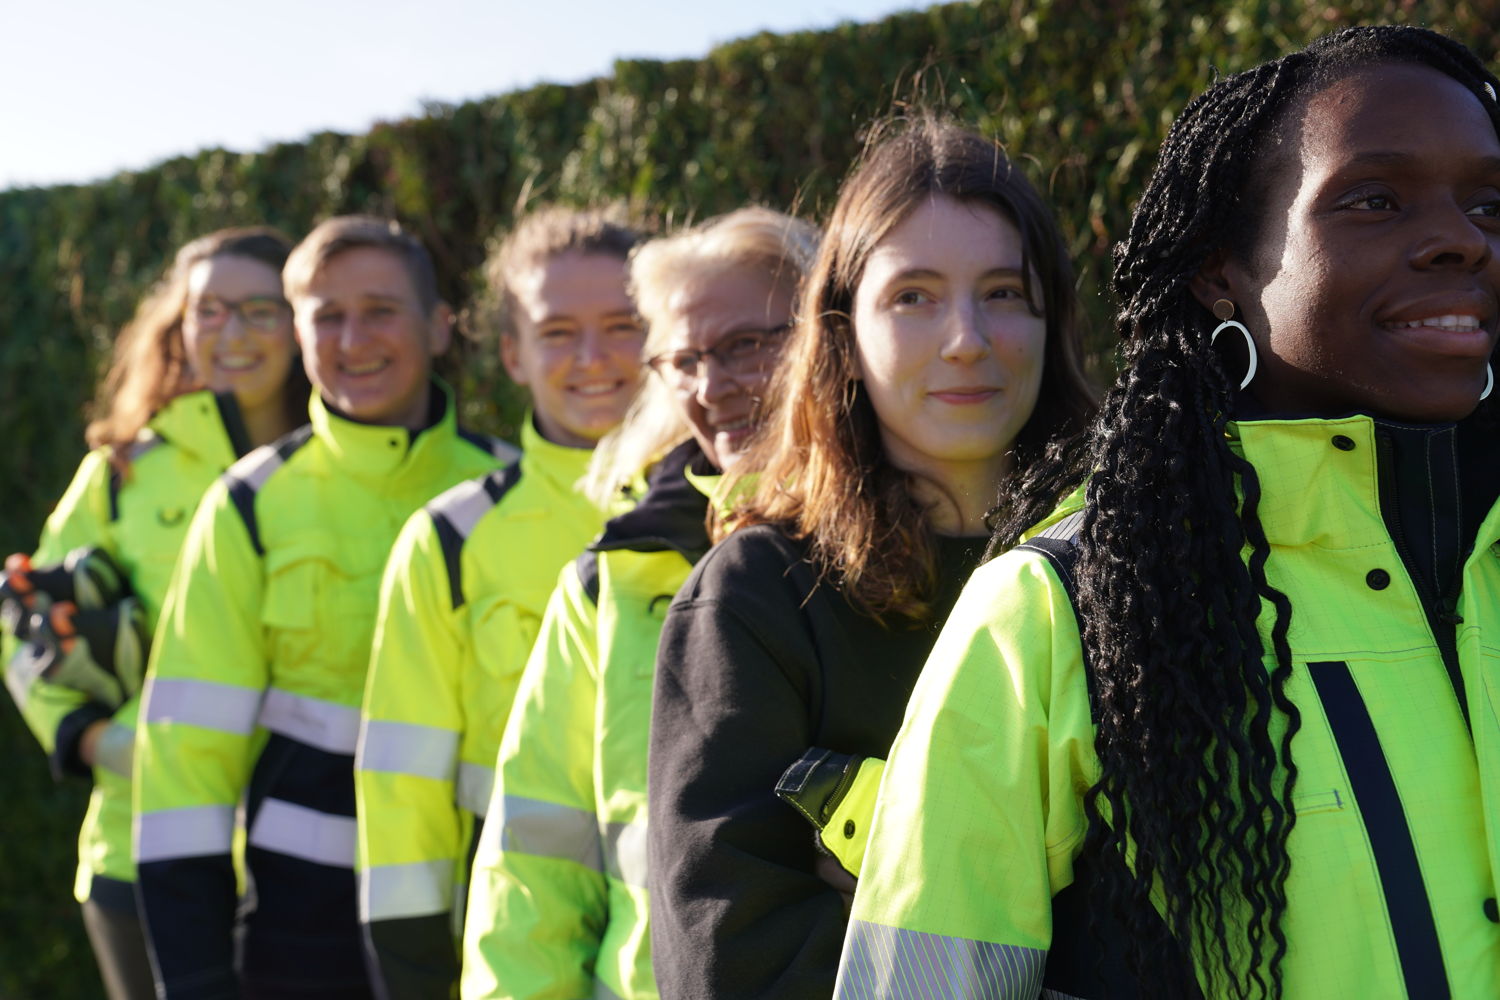 VINCI Energies in Belgium will be providing its female collaborators with adapted workwear.